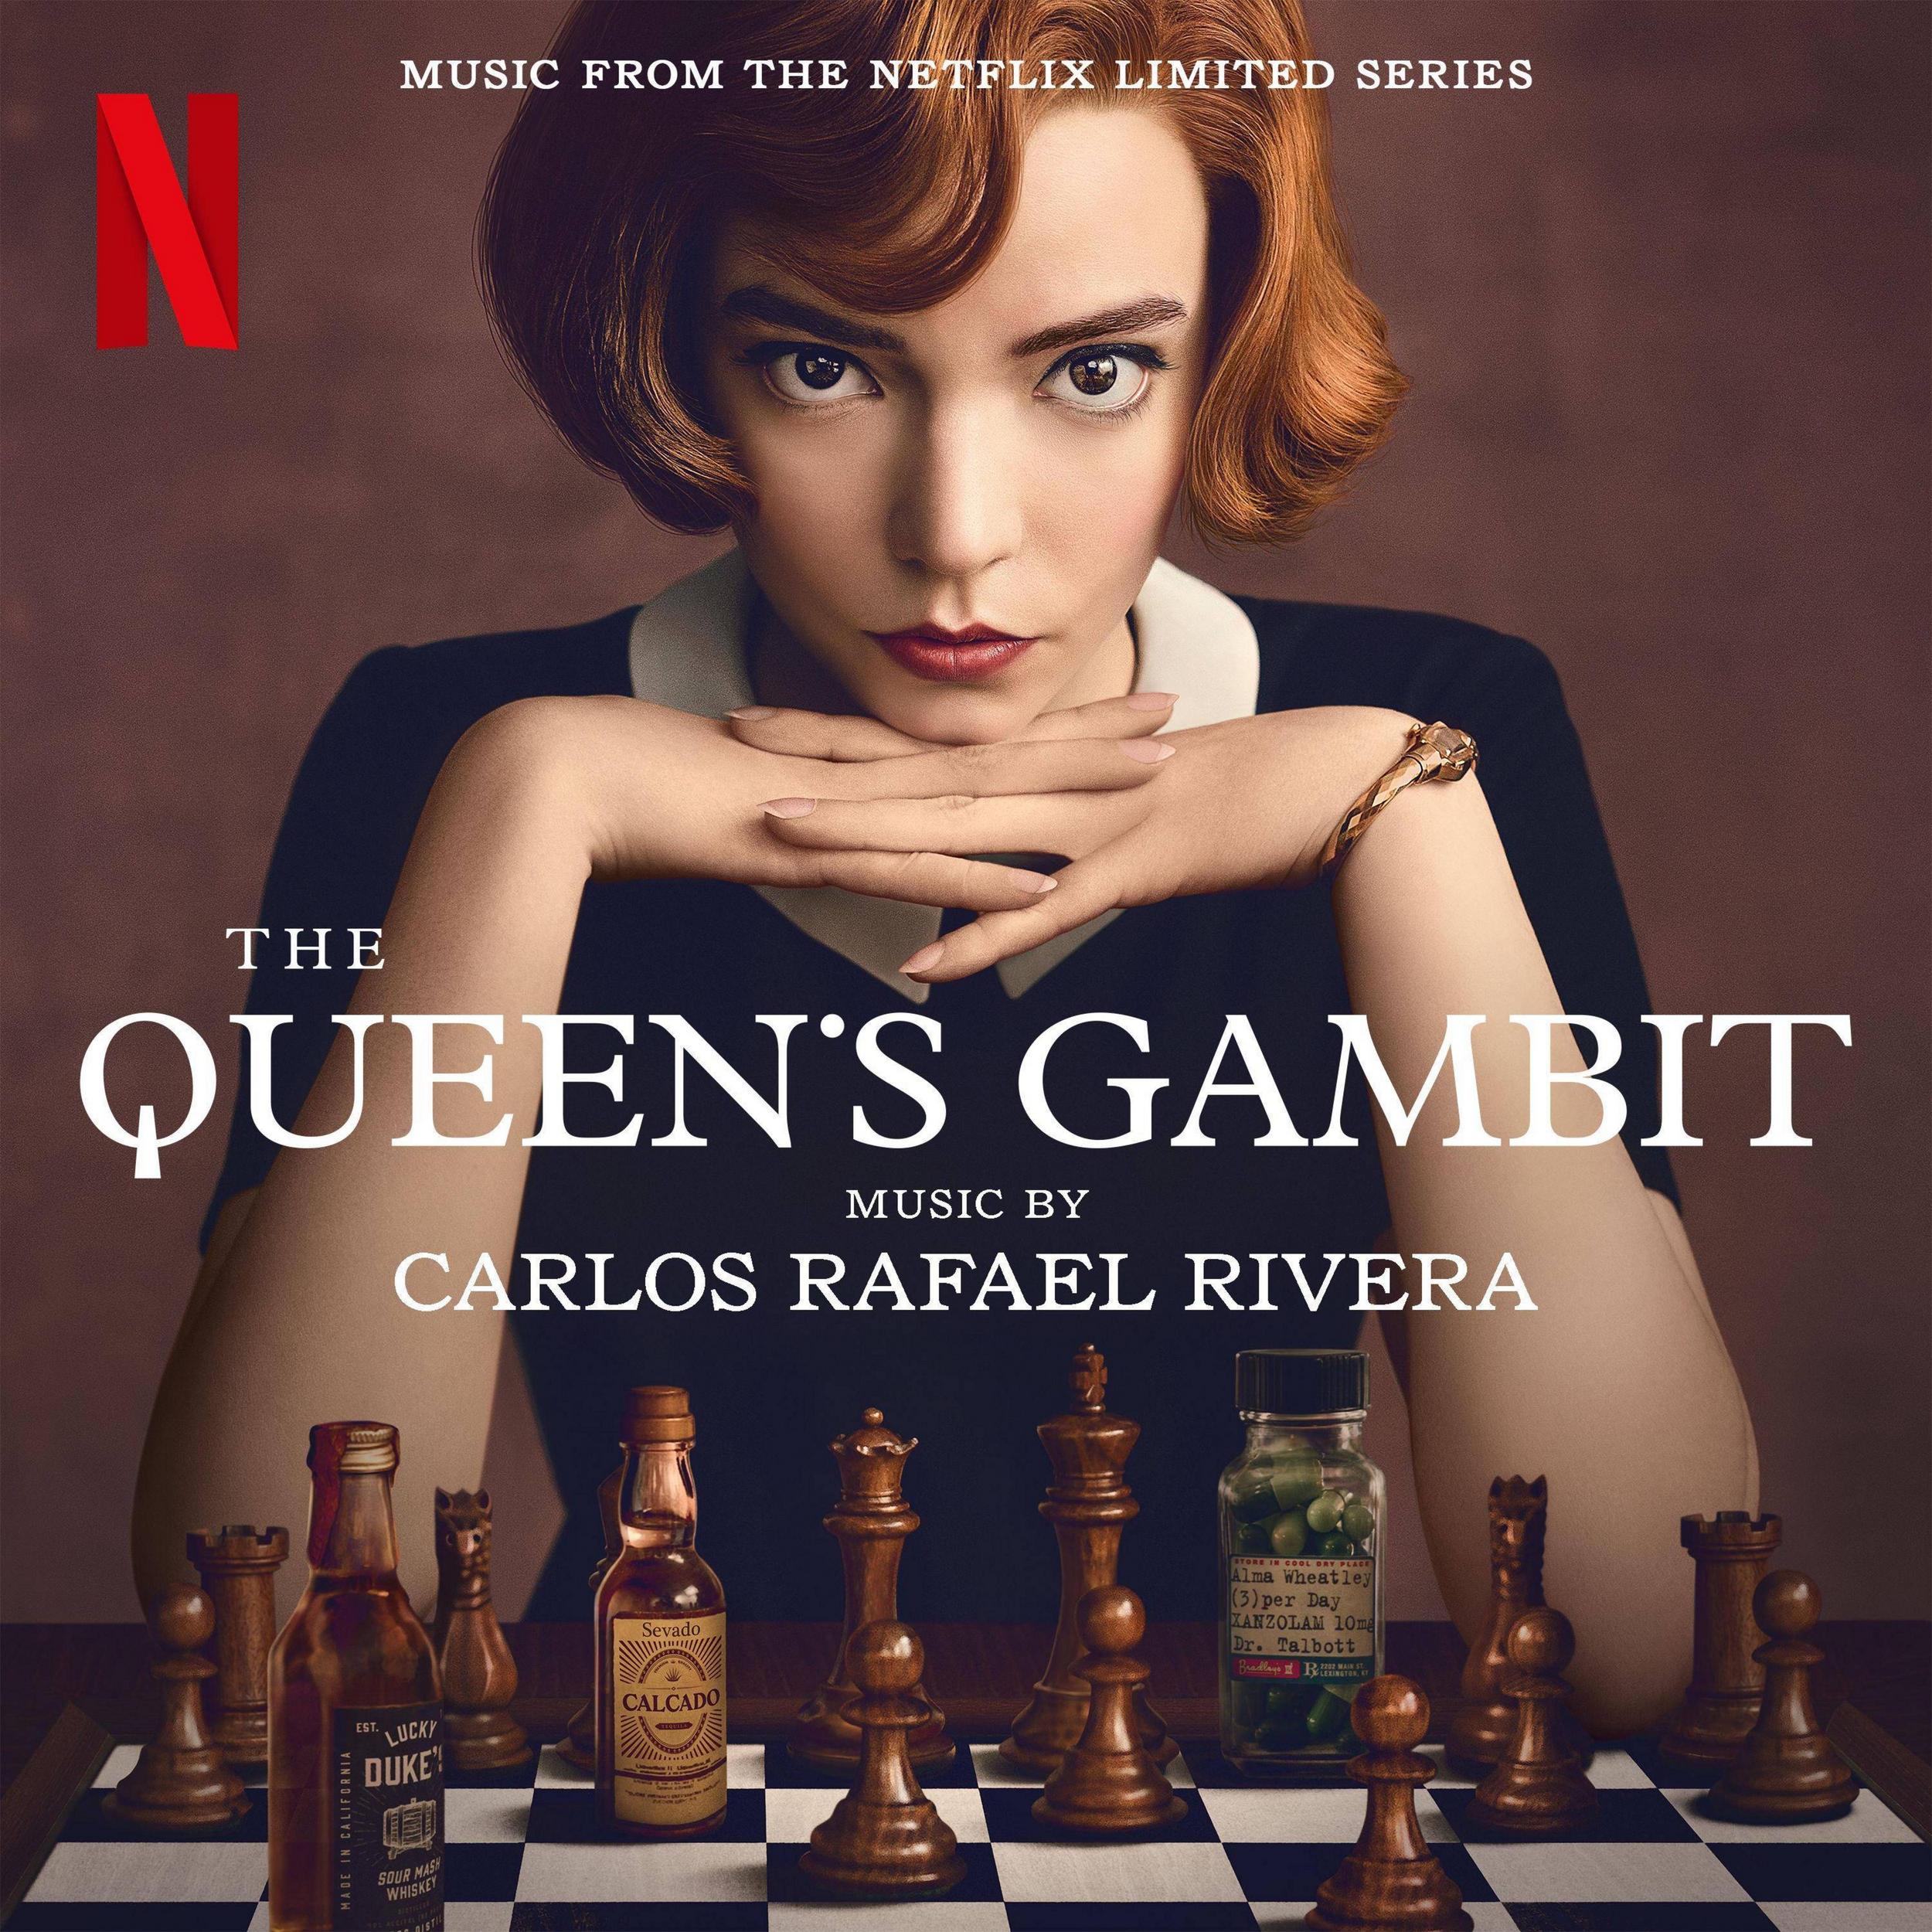 Carlos Rafael Rivera – The Queen’s Gambit (Music from the Netflix Limited Series) (2020) [FLAC 24bit/48kHz]